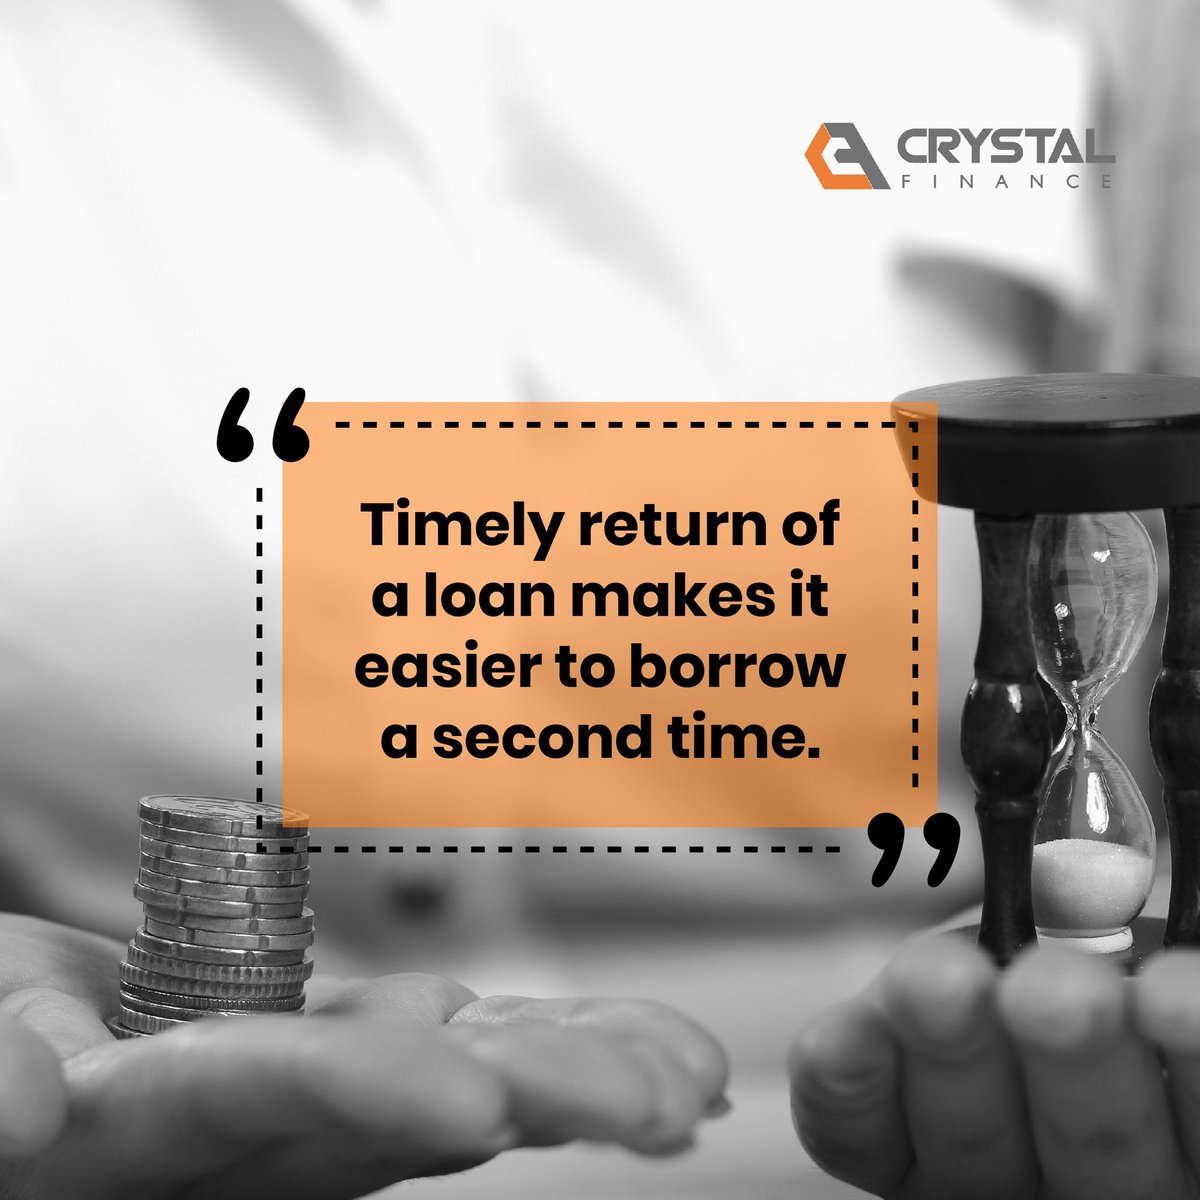 Whether you're borrowing from an individual or a financial institution.
Always remember to keep the same energy you had when you were taking the loan.
Payback in due time!👌🏽

#SMEloans
#CrystalFinance